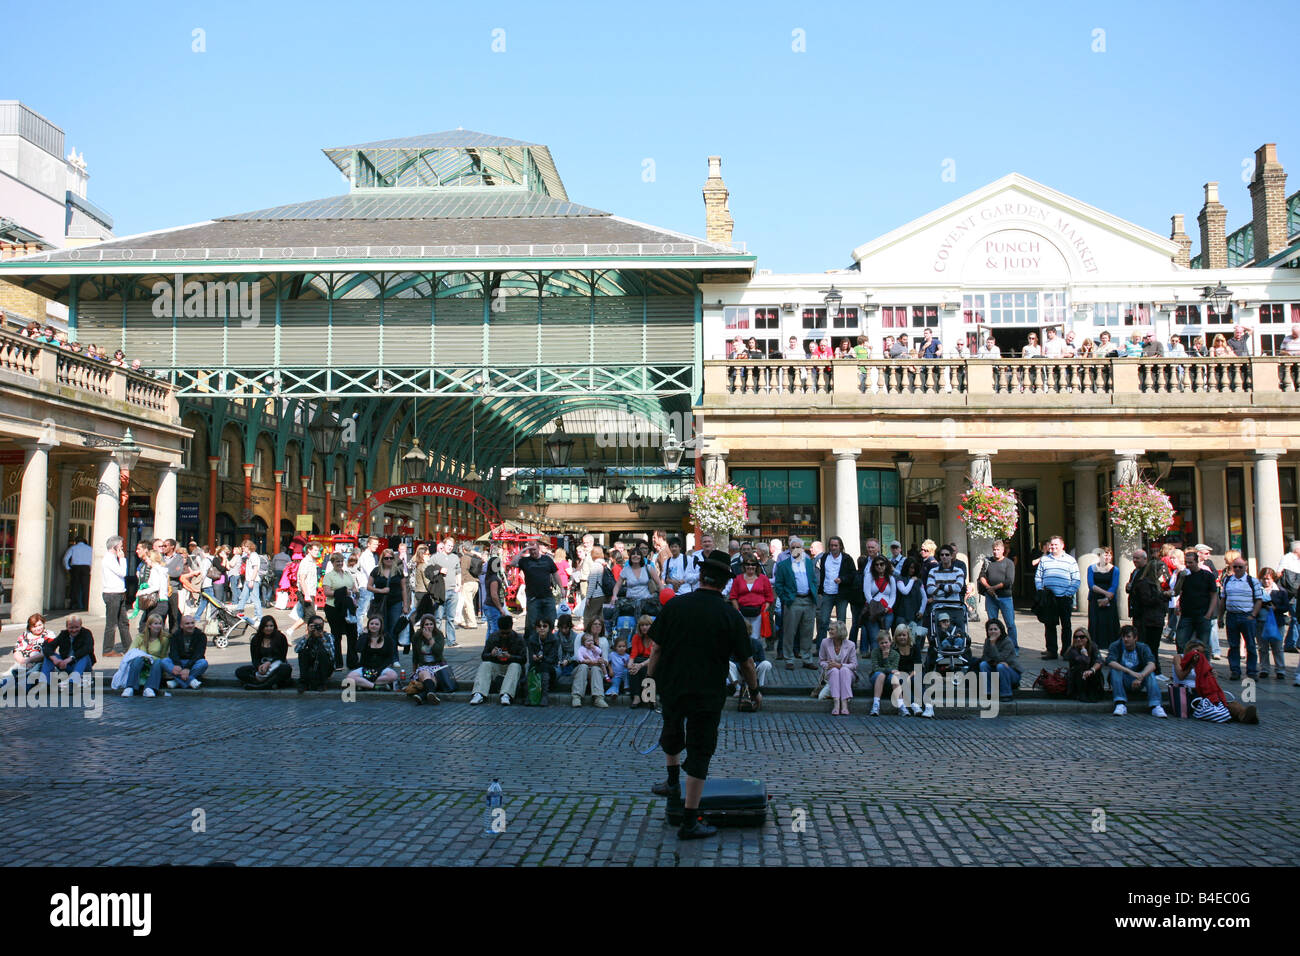 Street performer plays to a large crowd of tourists assembled outside Covent Garden, a popular sightseeing location in London UK Stock Photo